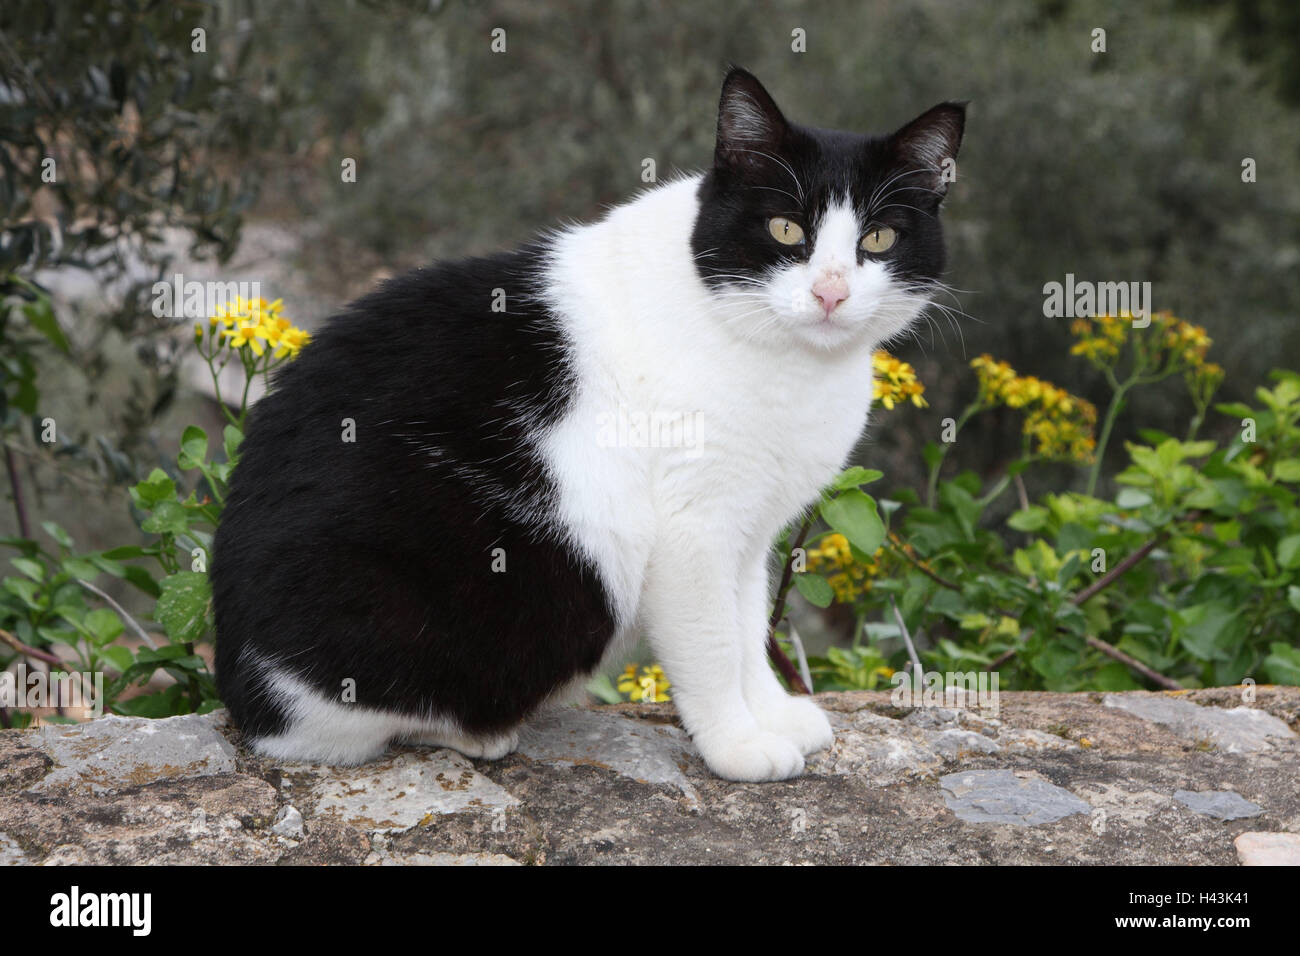 Cat, black-and-white, sit, defensive wall, animals, mammals, pets, small cats, Felidae, domesticates, house cat, without Lord, day release prisoners, stray, street cat, individually, only, outside, garden defensive wall, Spain, Stock Photo